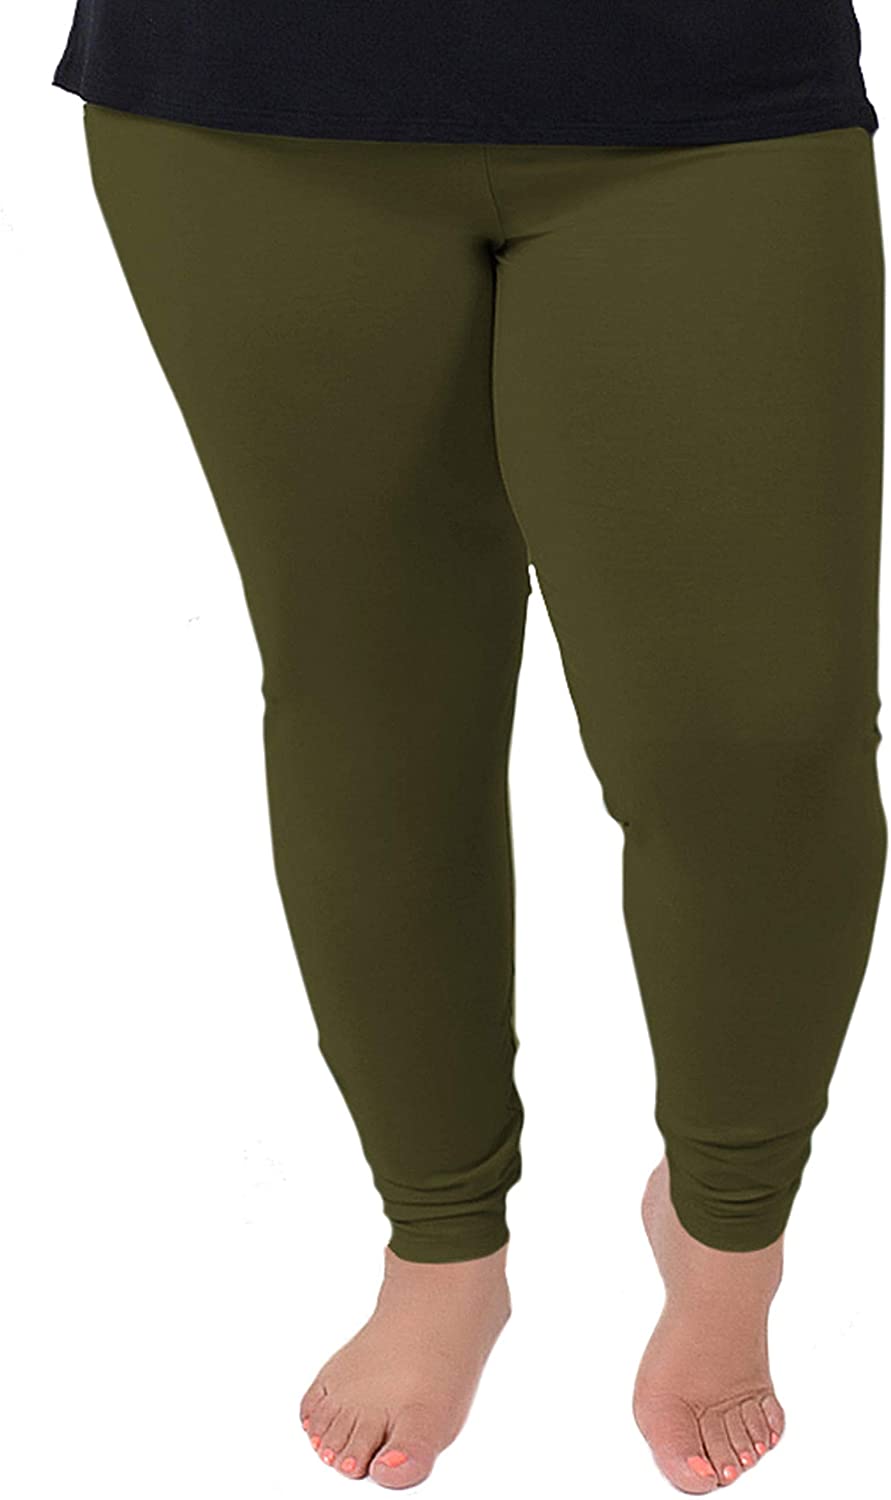 STRETCH IS COMFORT Women's Oh So Soft PS Leggings Charcoal Gray 3X 